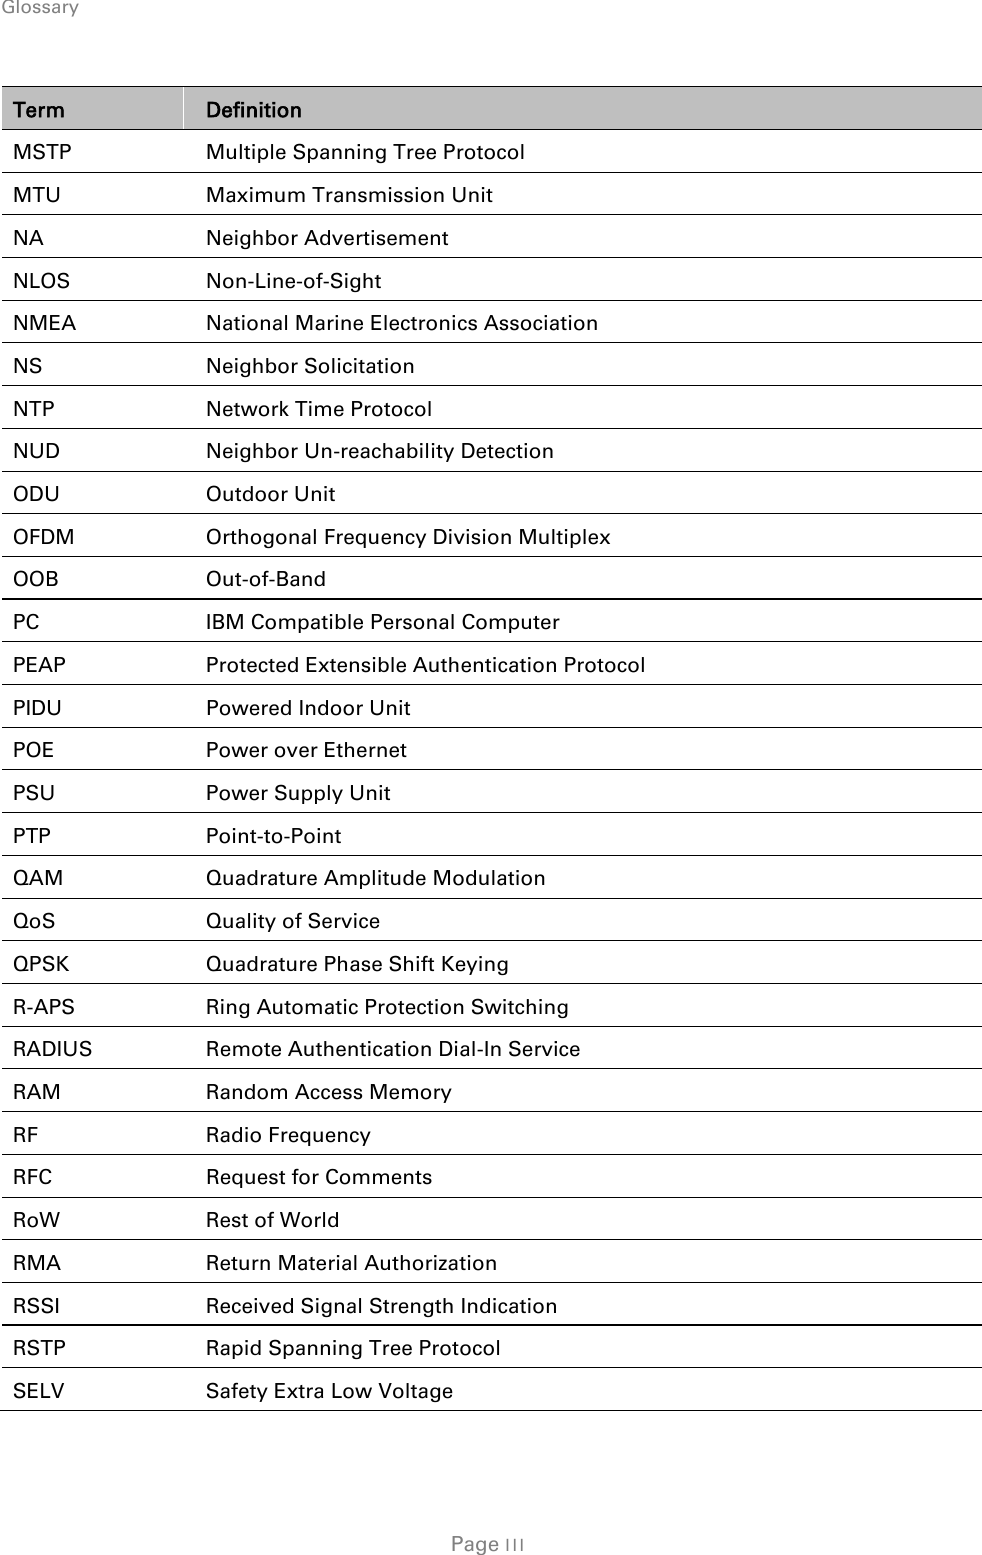 Glossary    Term Definition MSTP Multiple Spanning Tree Protocol MTU Maximum Transmission Unit NA Neighbor Advertisement NLOS Non-Line-of-Sight NMEA National Marine Electronics Association NS Neighbor Solicitation NTP Network Time Protocol NUD Neighbor Un-reachability Detection ODU Outdoor Unit OFDM Orthogonal Frequency Division Multiplex OOB Out-of-Band PC IBM Compatible Personal Computer PEAP Protected Extensible Authentication Protocol PIDU Powered Indoor Unit POE Power over Ethernet PSU Power Supply Unit PTP Point-to-Point QAM Quadrature Amplitude Modulation QoS Quality of Service QPSK Quadrature Phase Shift Keying R-APS Ring Automatic Protection Switching RADIUS  Remote Authentication Dial-In Service RAM Random Access Memory RF Radio Frequency RFC Request for Comments RoW Rest of World RMA Return Material Authorization RSSI Received Signal Strength Indication RSTP Rapid Spanning Tree Protocol SELV Safety Extra Low Voltage  Page III 